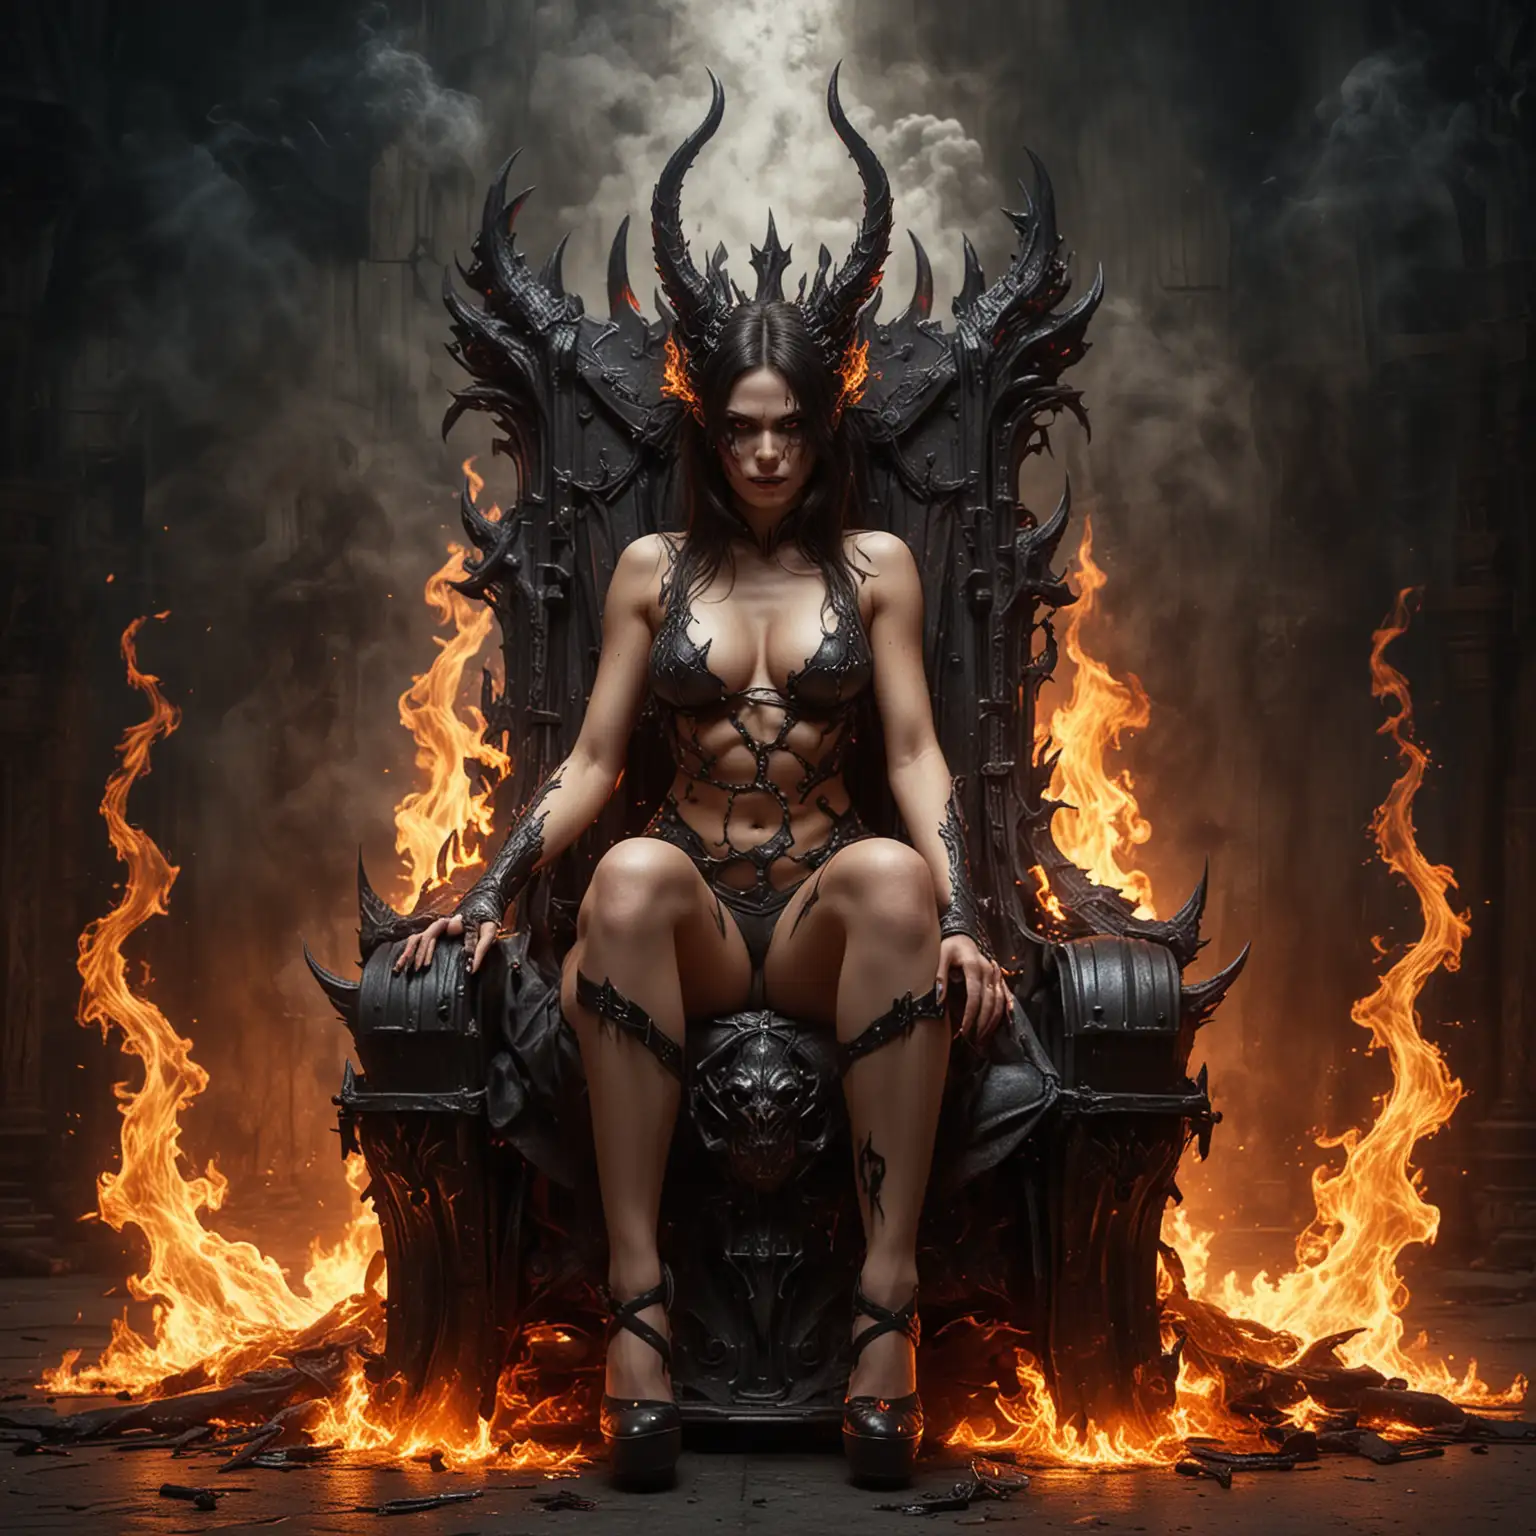 Sultry Demoness on Flaming Iron Throne Riding a Scooter